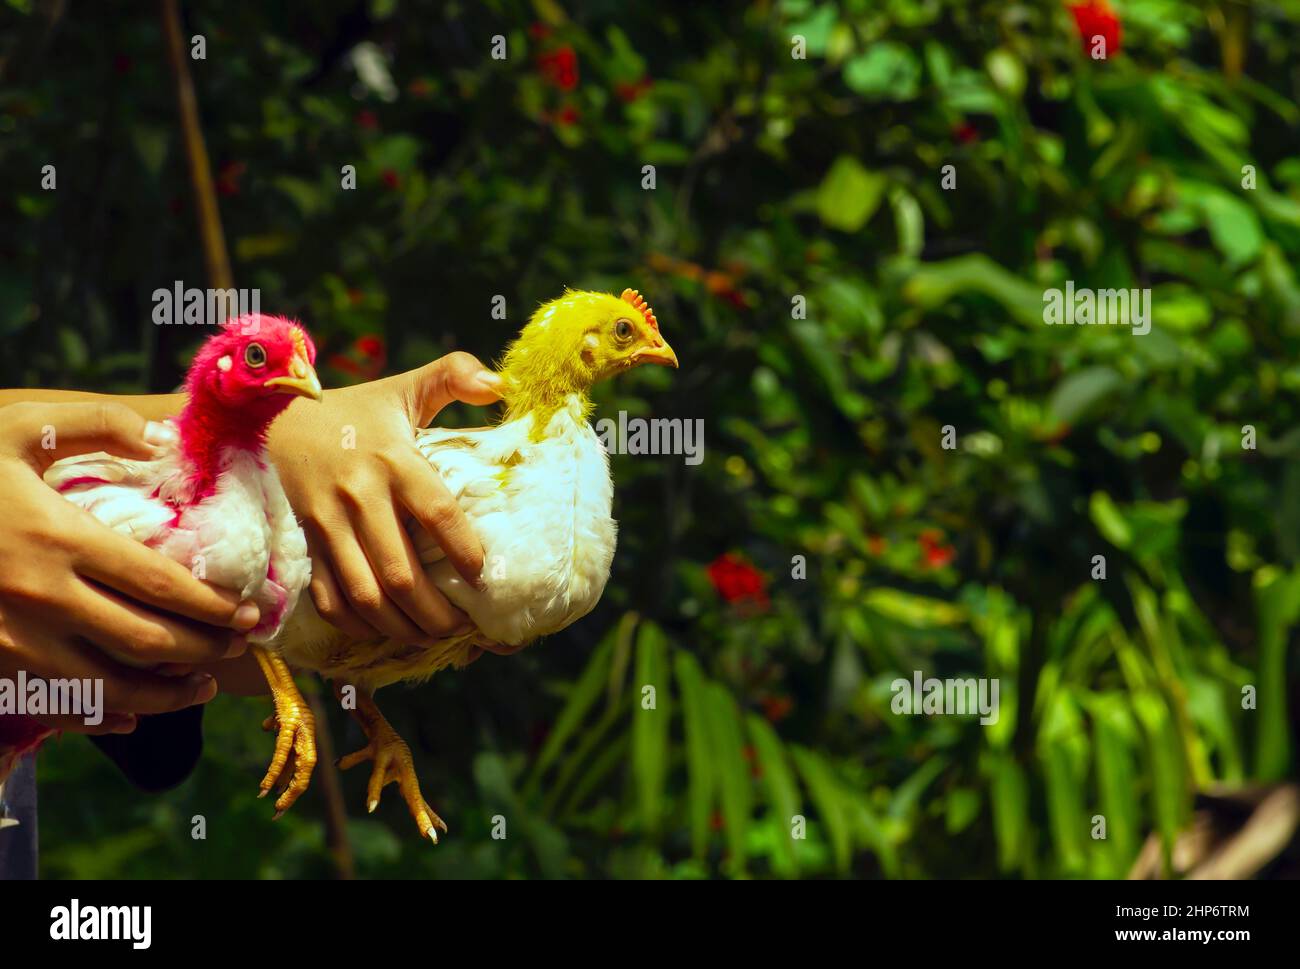 Children catch chicken with red and yellow head, selected focus Stock Photo